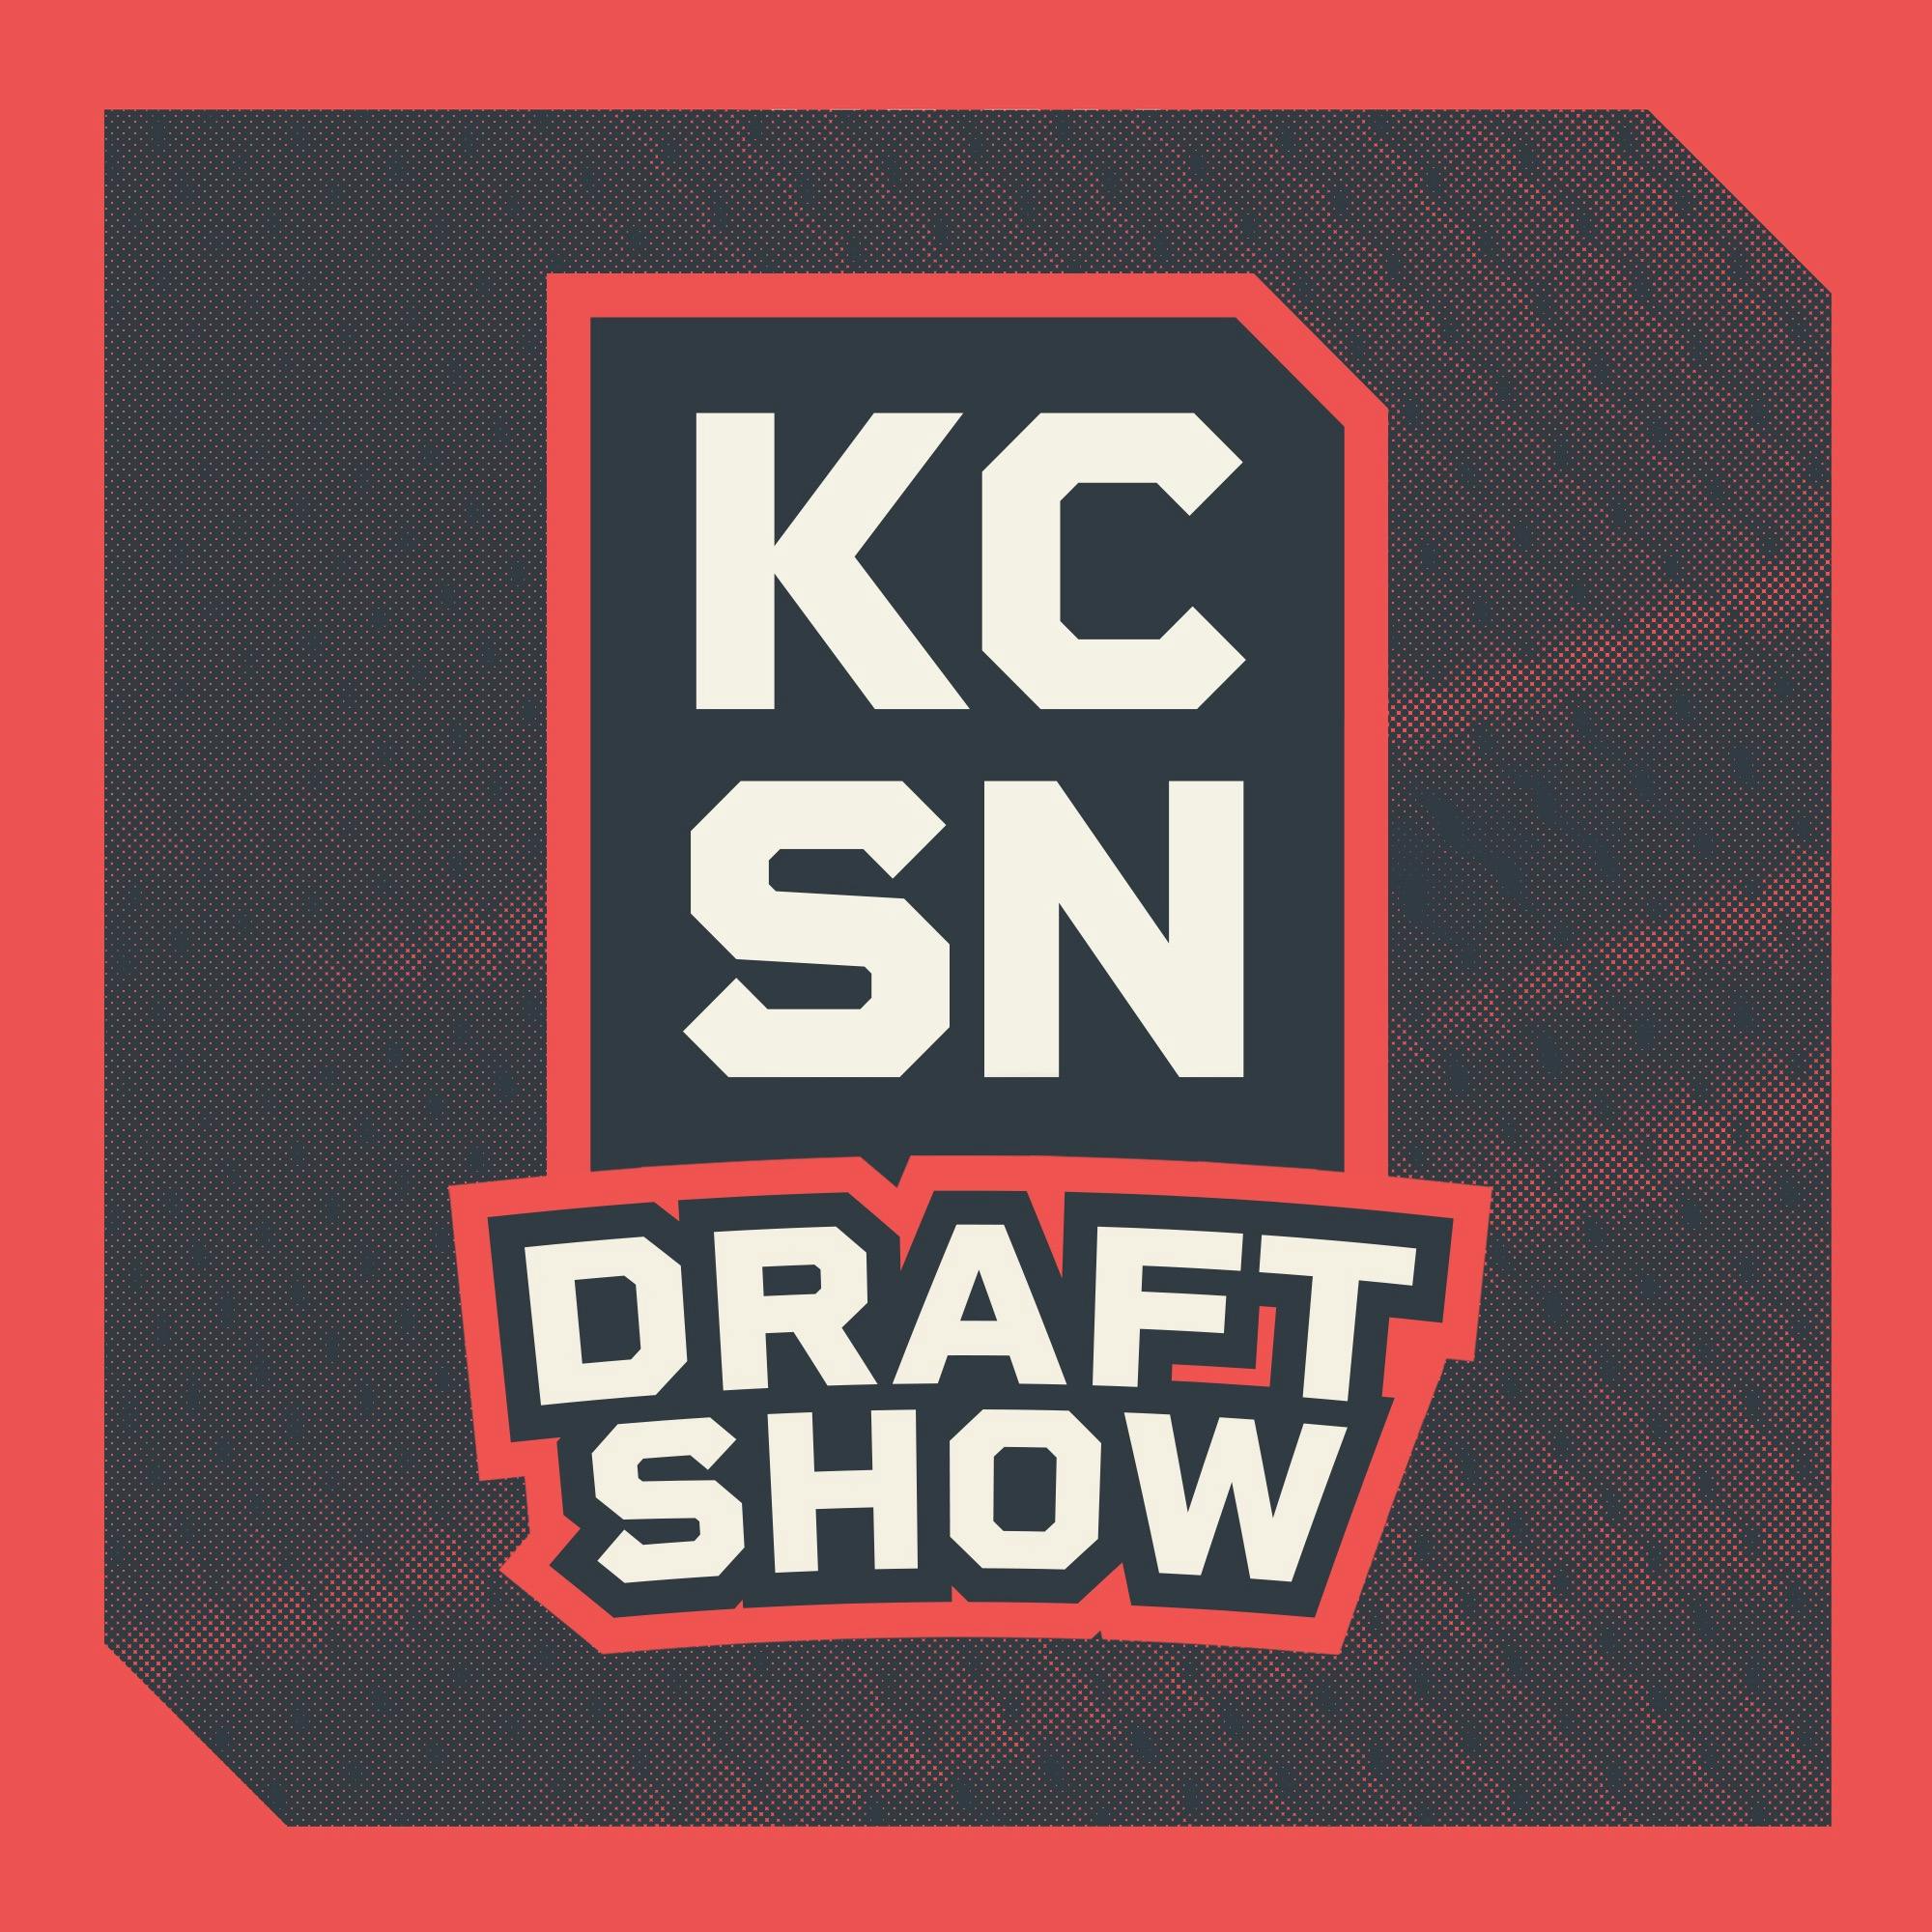 KCSN Draft Show 3/25: Exclusive 2024 NFL Draft Interviews with Carson Steele, Frank Gore Jr., and Dallin Holker